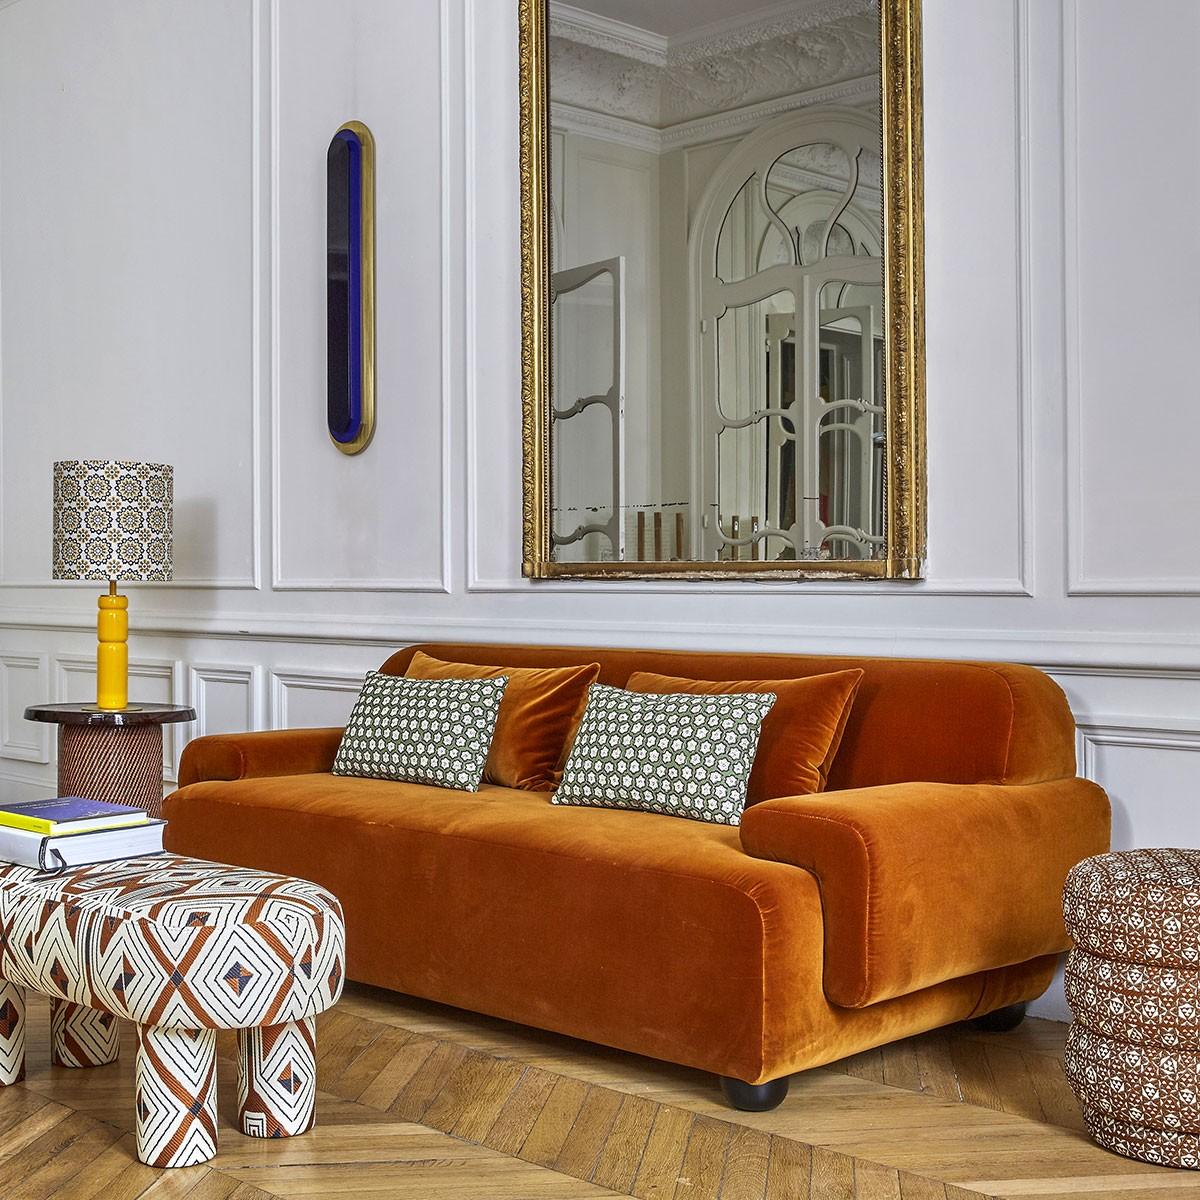 Popus editions lena 3 seater sofa in oil como velvet upholstery.

It looks like it's straight out of a movie, with its generous curves and wide armrests. It is a real invitation to spend long Sundays with the family, comfortably seated in front of